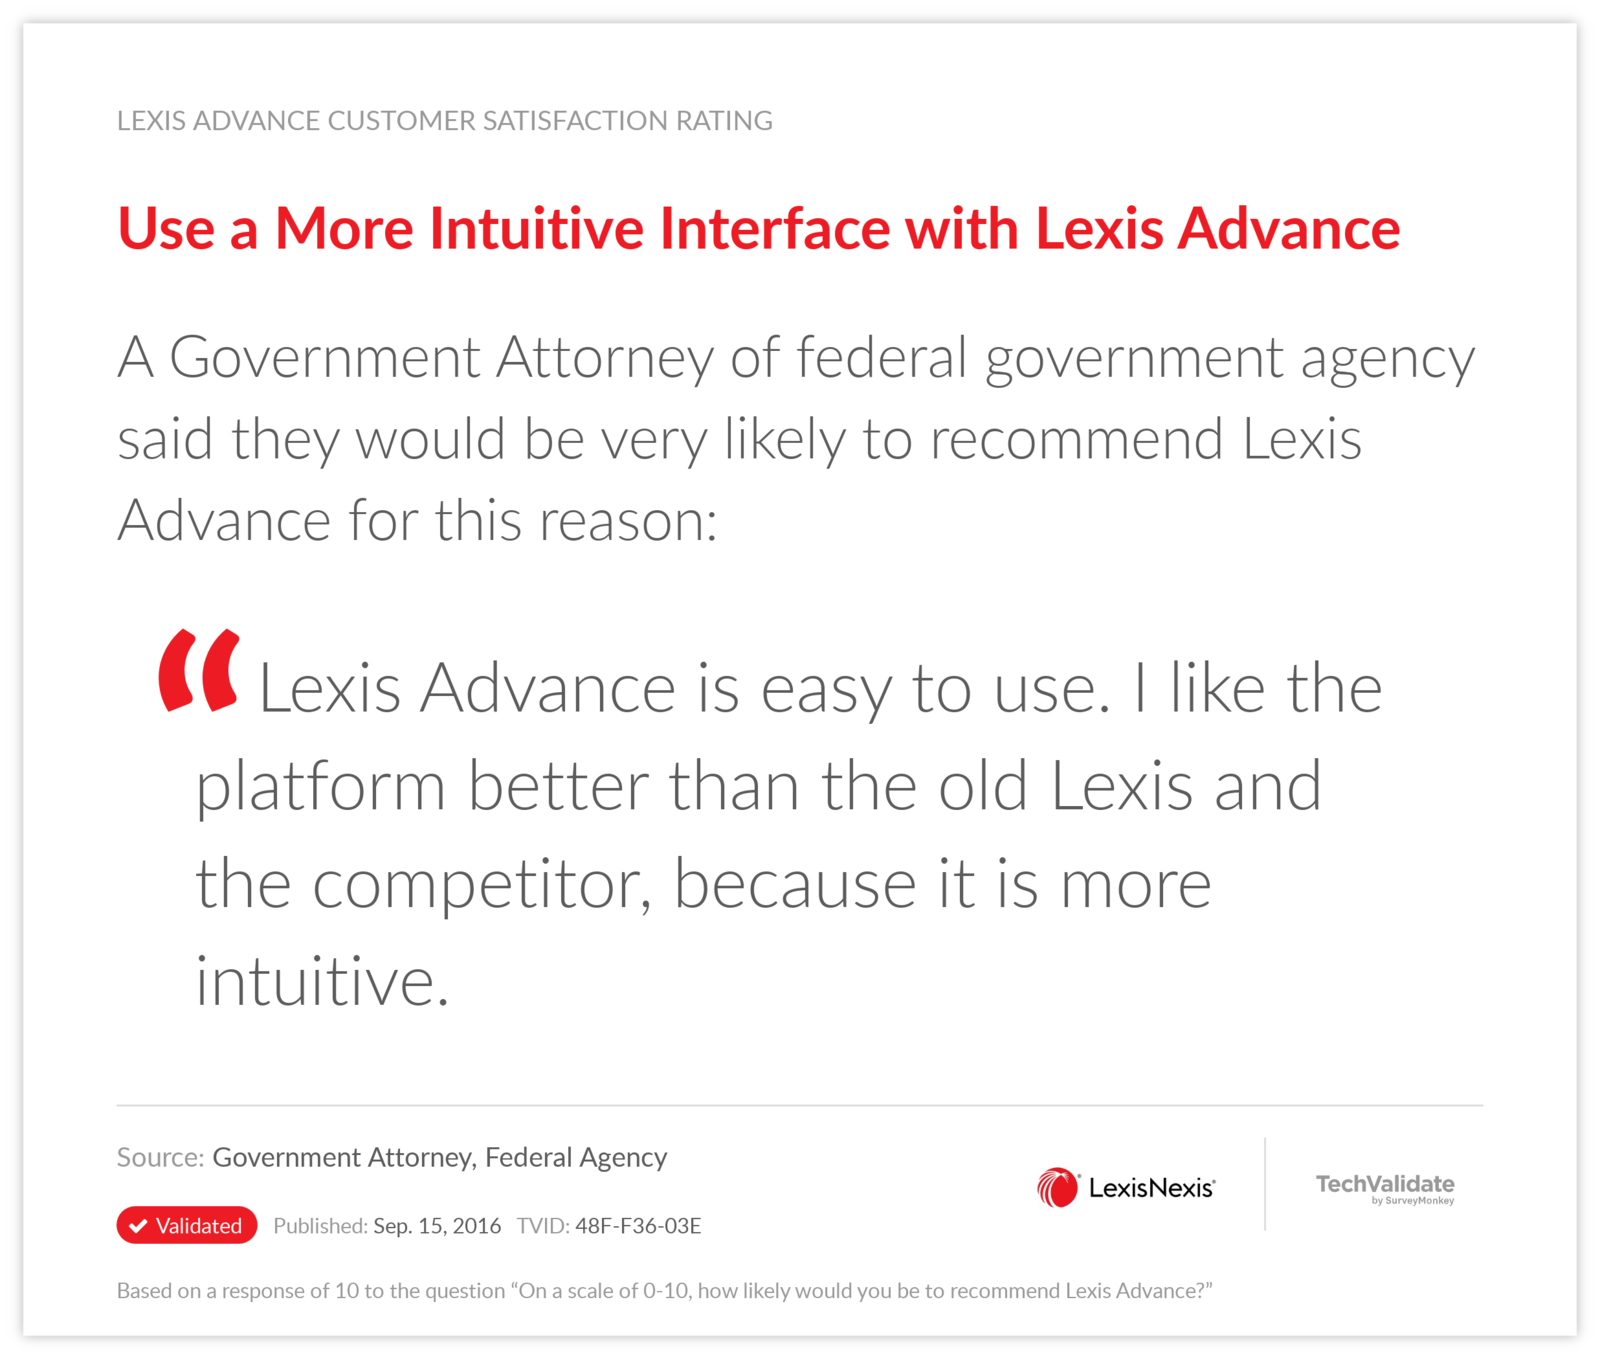 Use a More Intuitive Interface with Lexis Advance